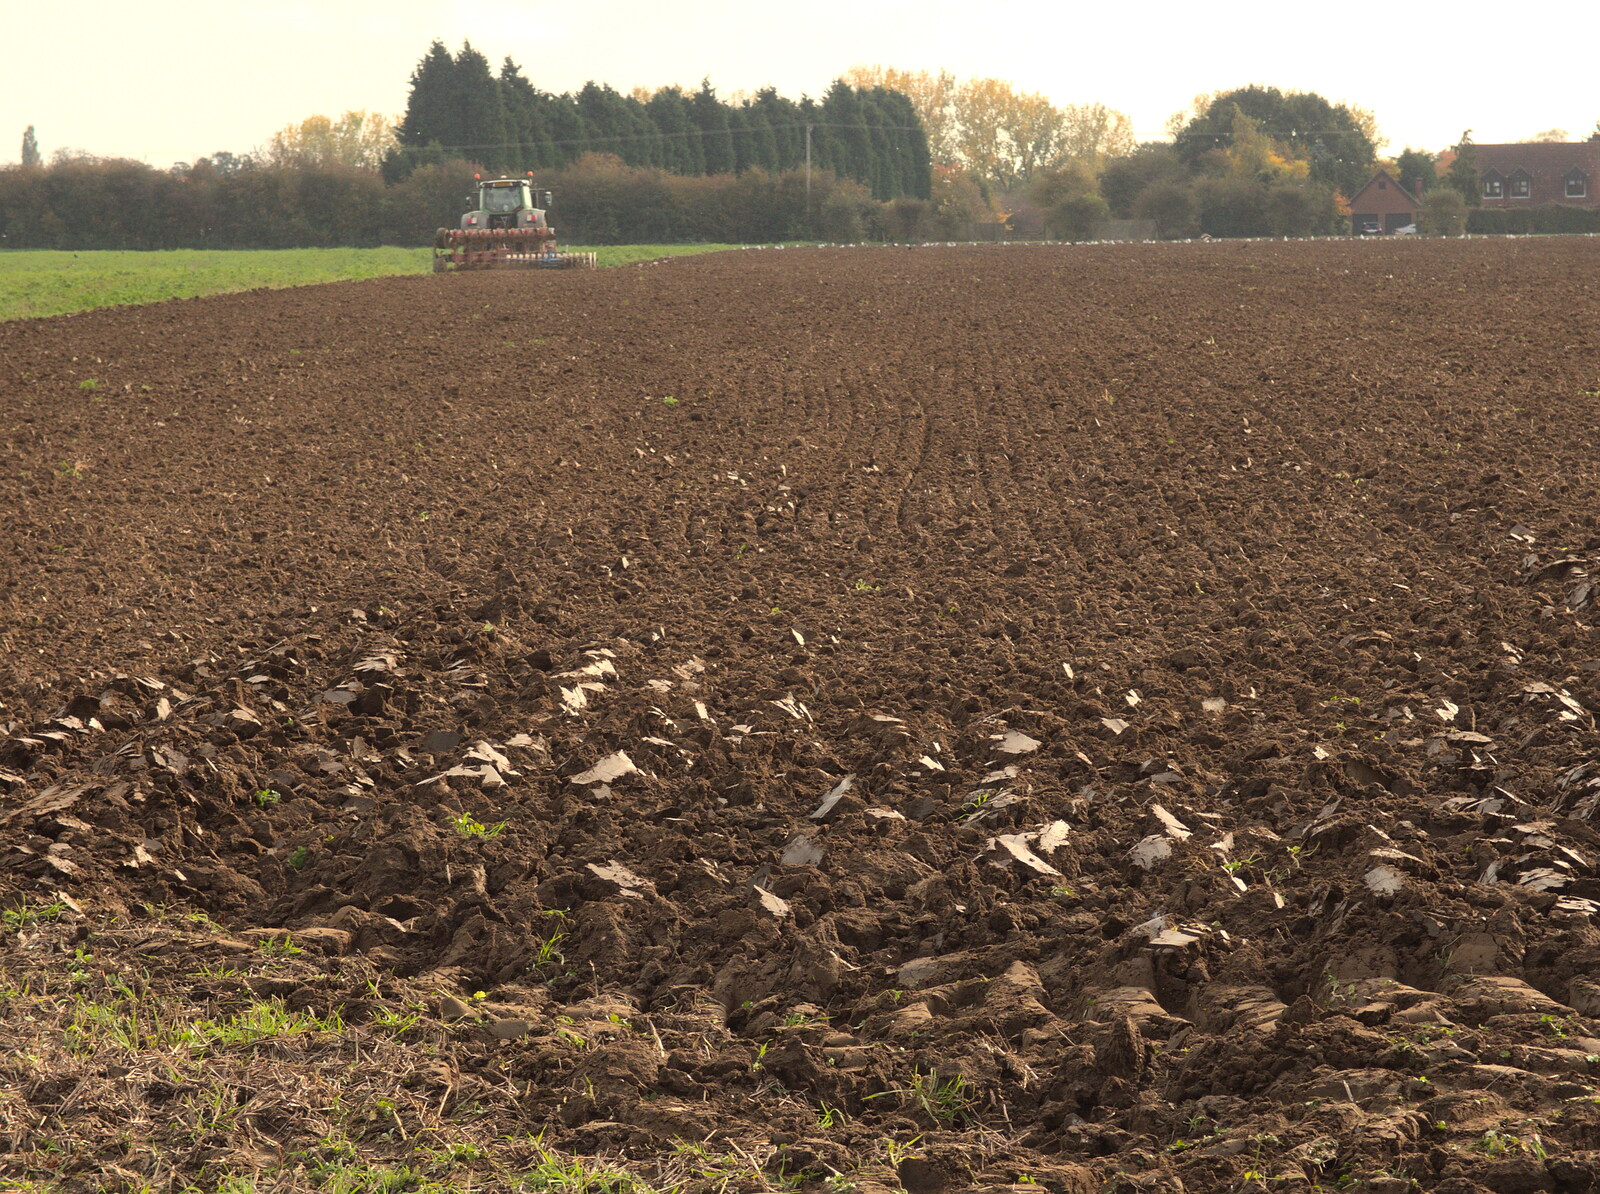 The tractor ploughs up the field from Tractor Rides and Pub Cellars, Brome, Suffolk - 29th October 2016